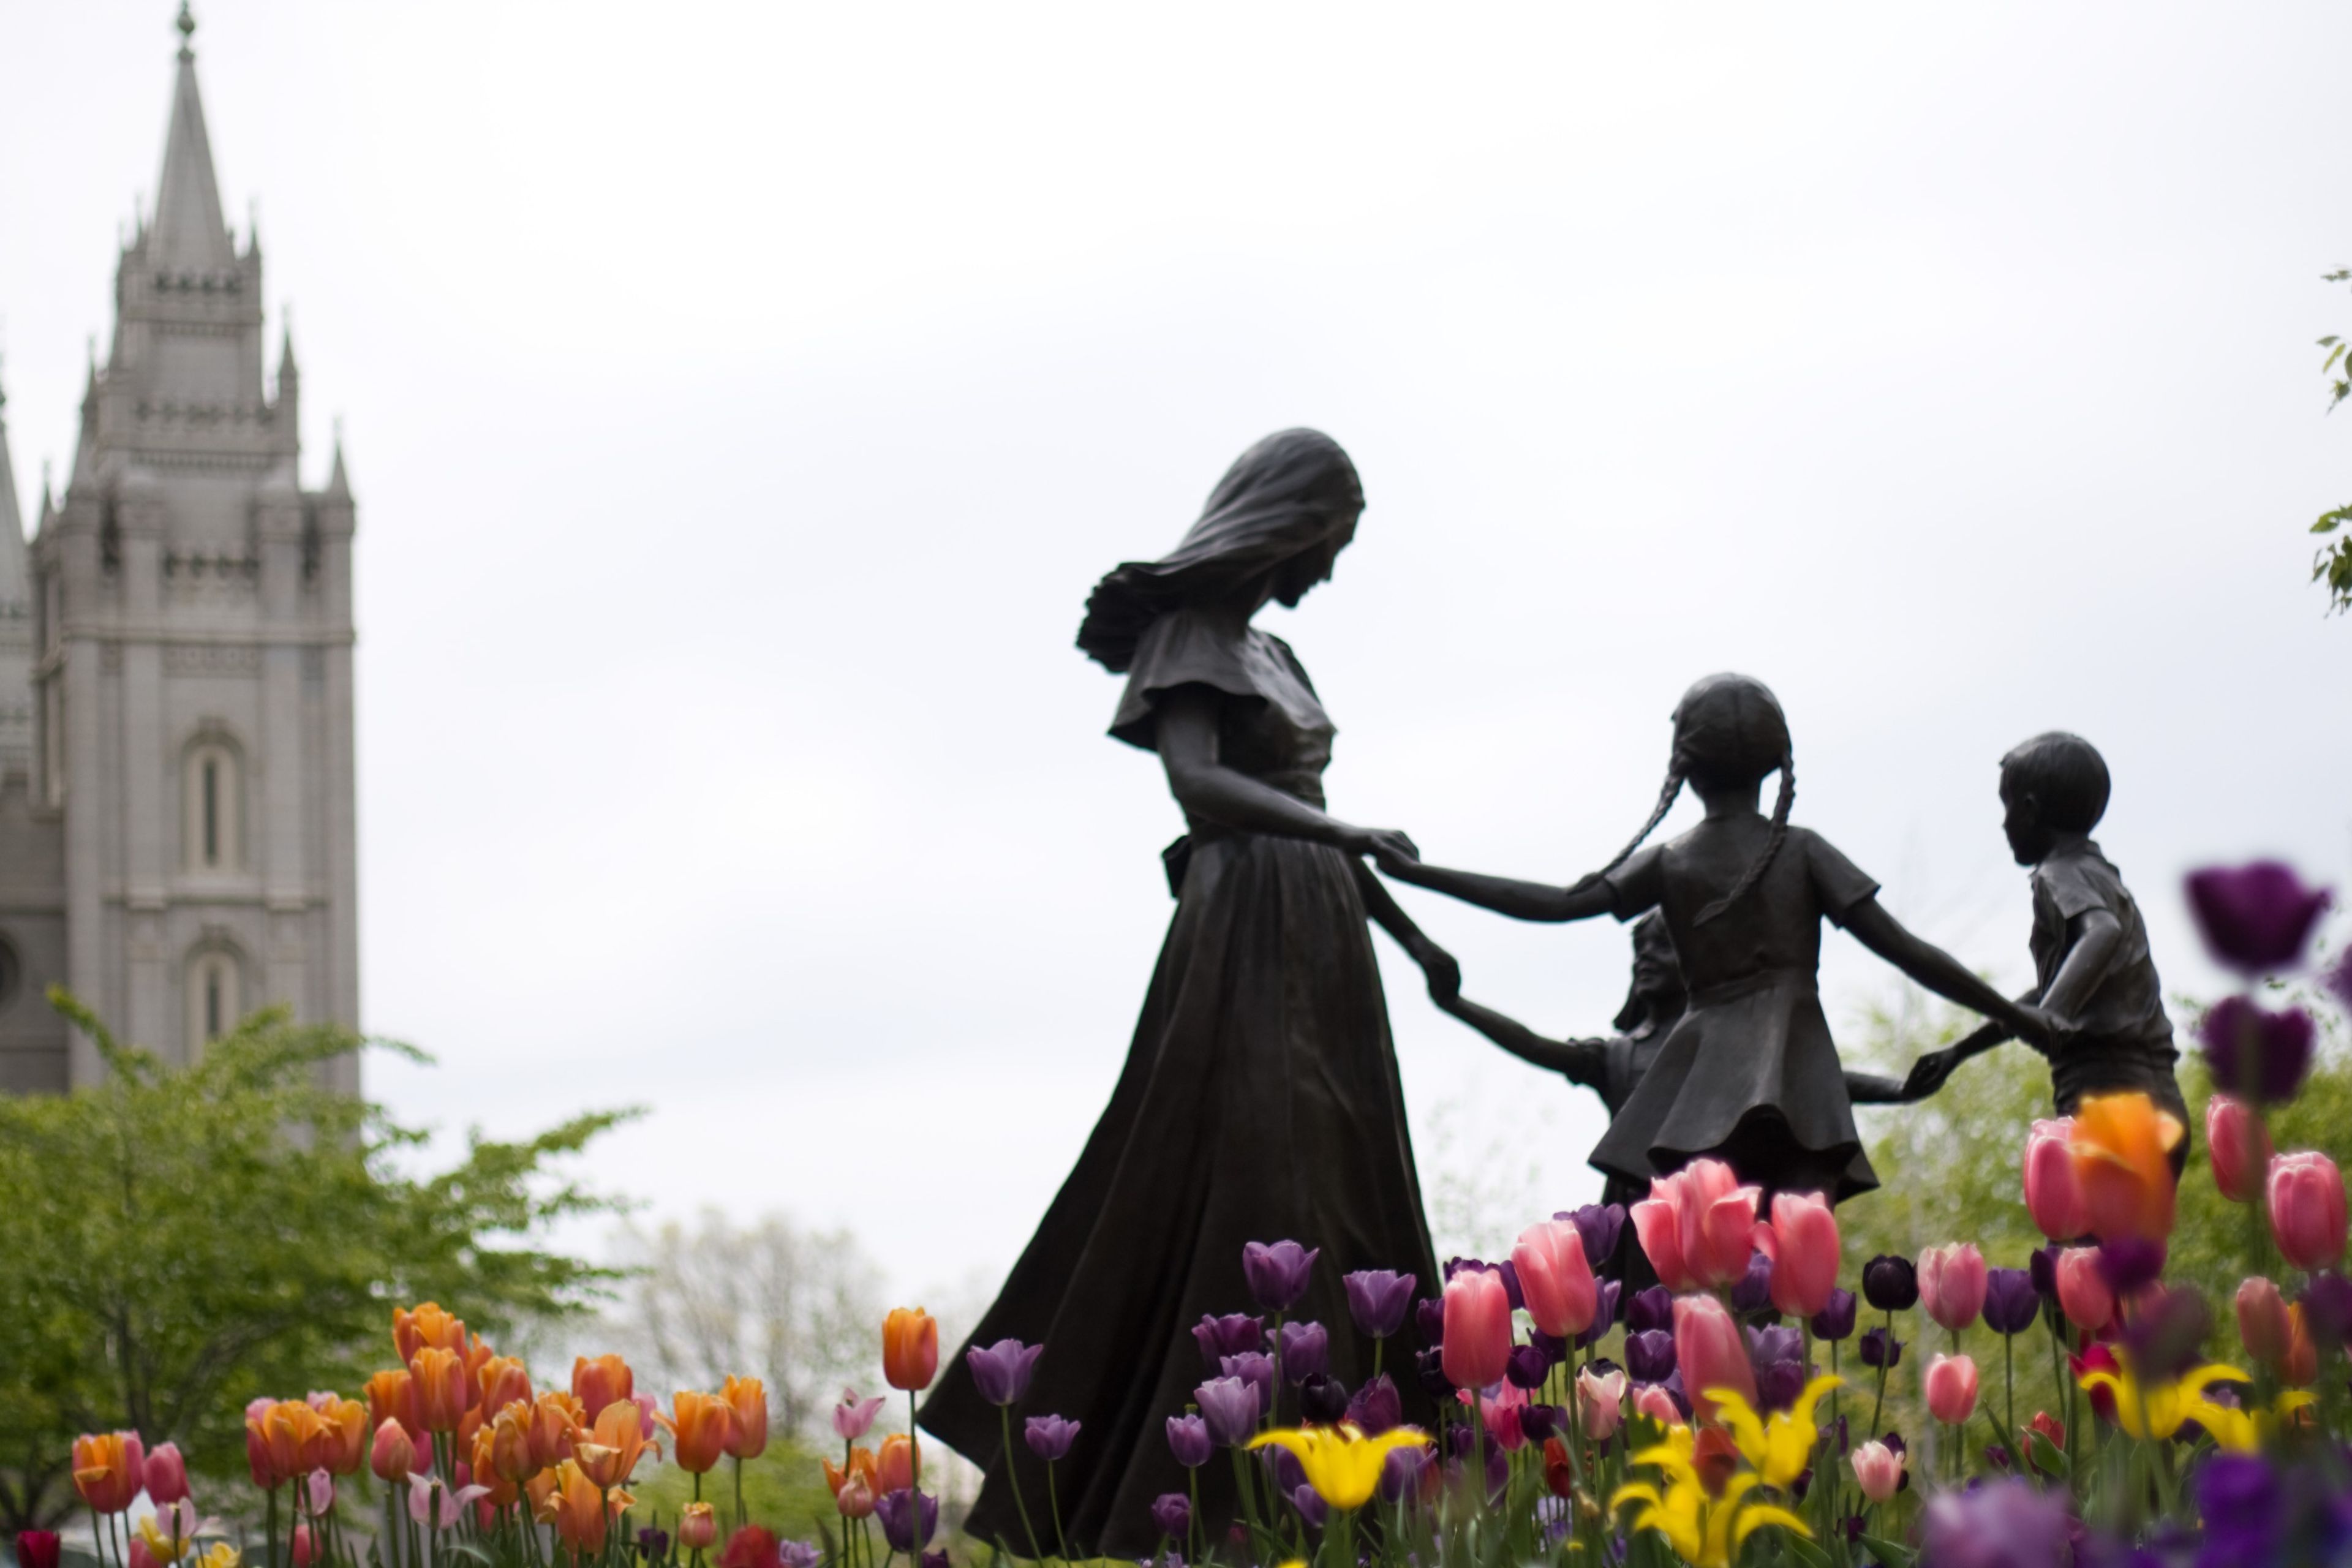 A sculpture of a family on Temple Square has tulips blooming around it, with the Salt Lake Temple in the background.